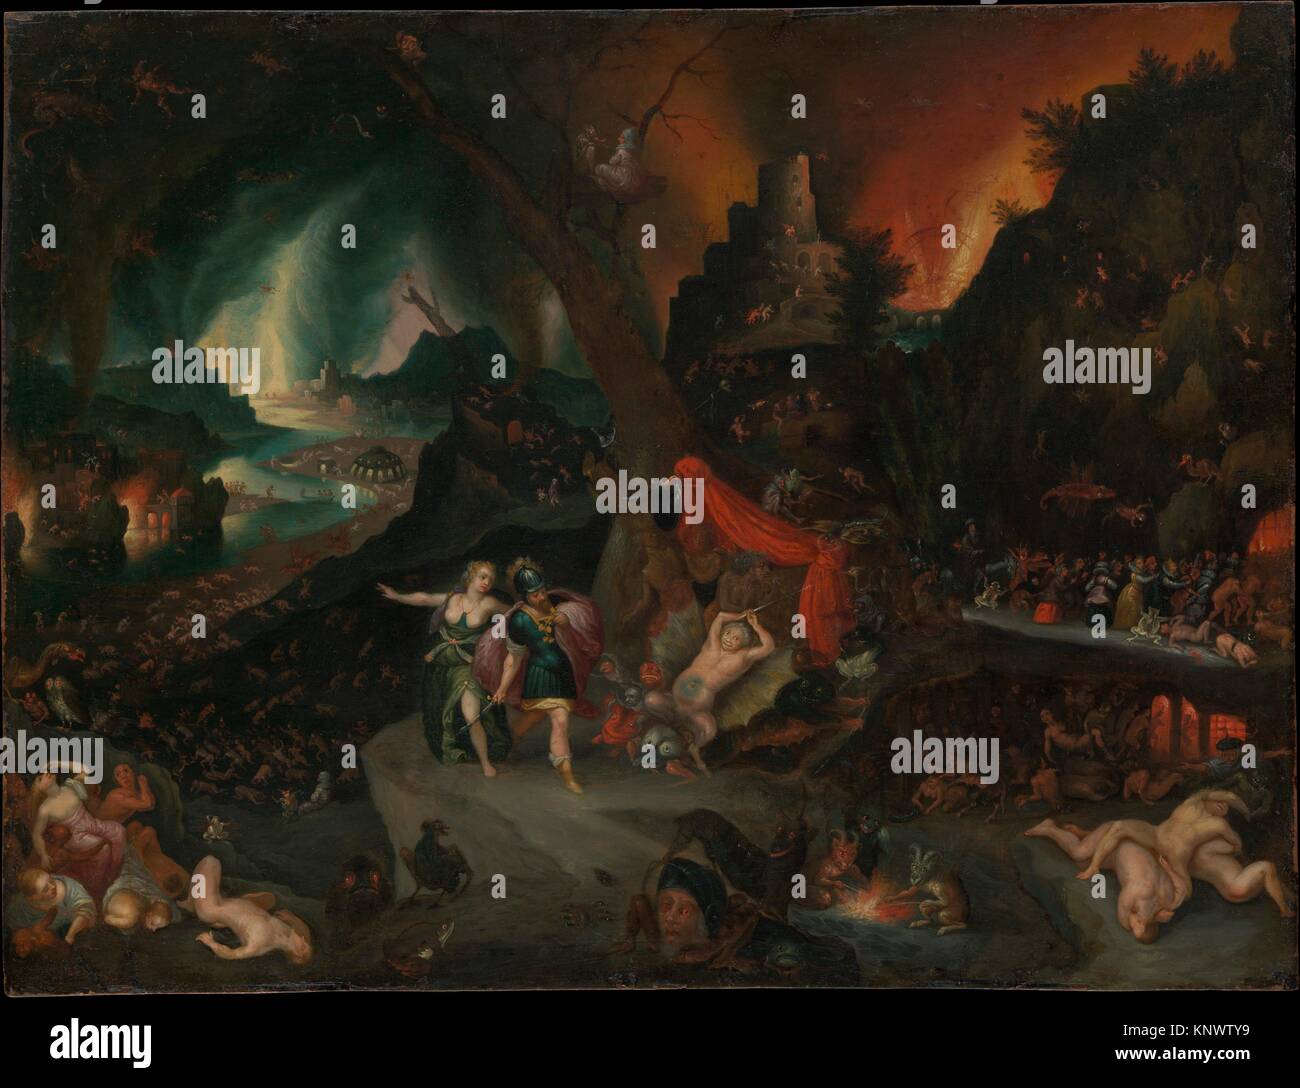 Aeneas and the Sibyl in the Underworld. Artist: Jan Brueghel the Younger (Flemish, Antwerp 1601-1678 Antwerp); Date: 1630s; Medium: Oil on copper; Stock Photo